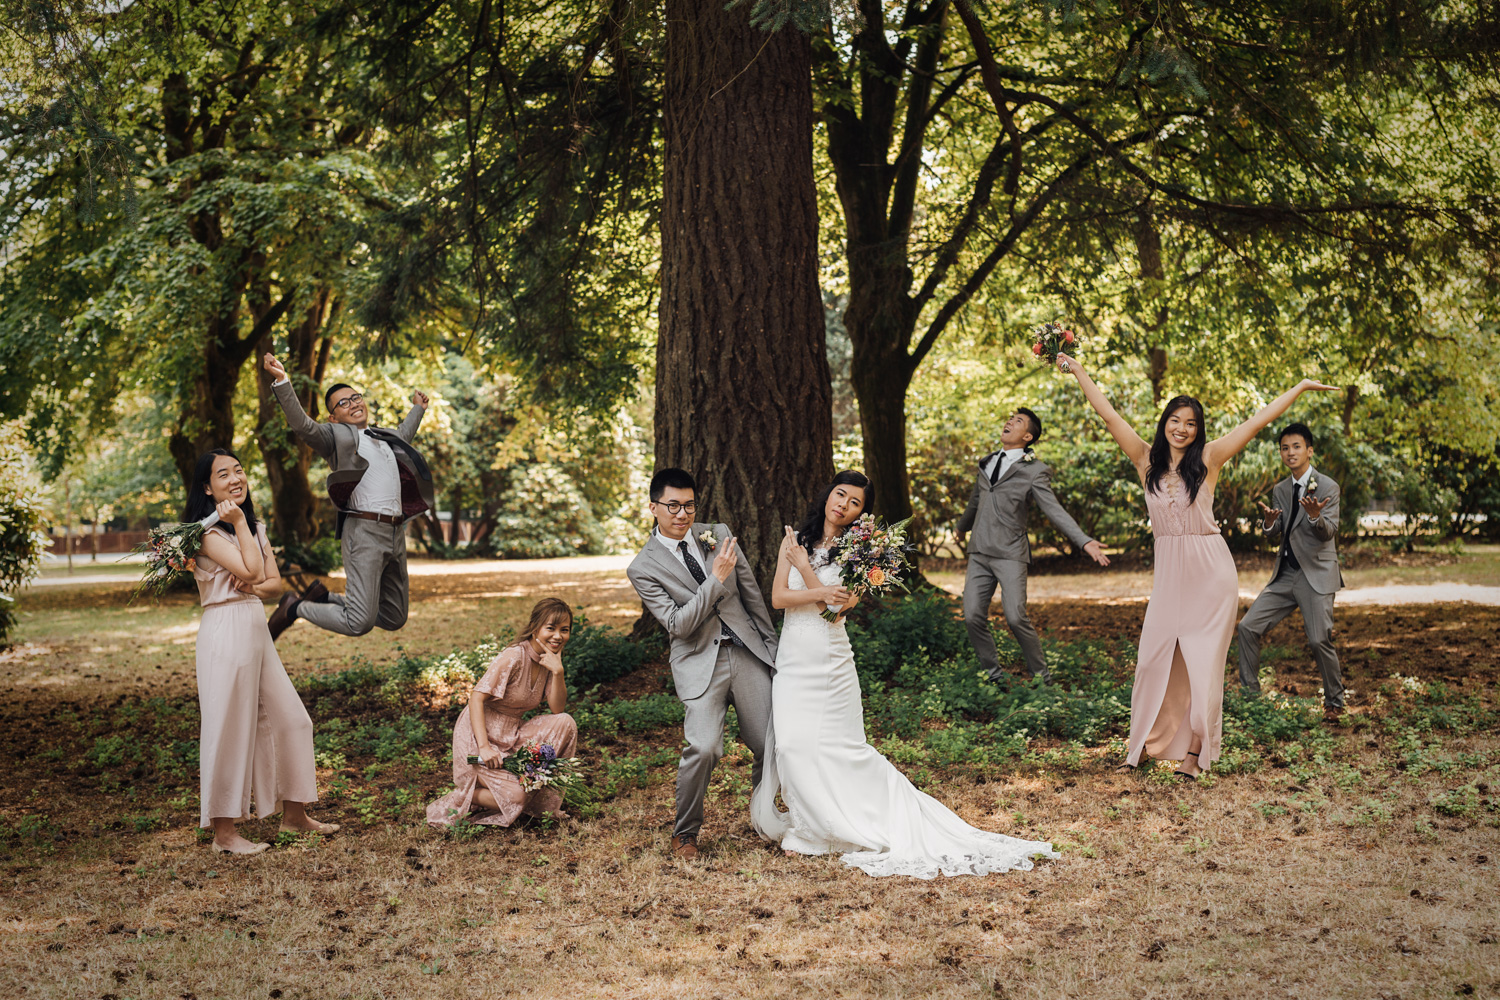 shaughnessy park bridal party portraits in vancouver wedding photography